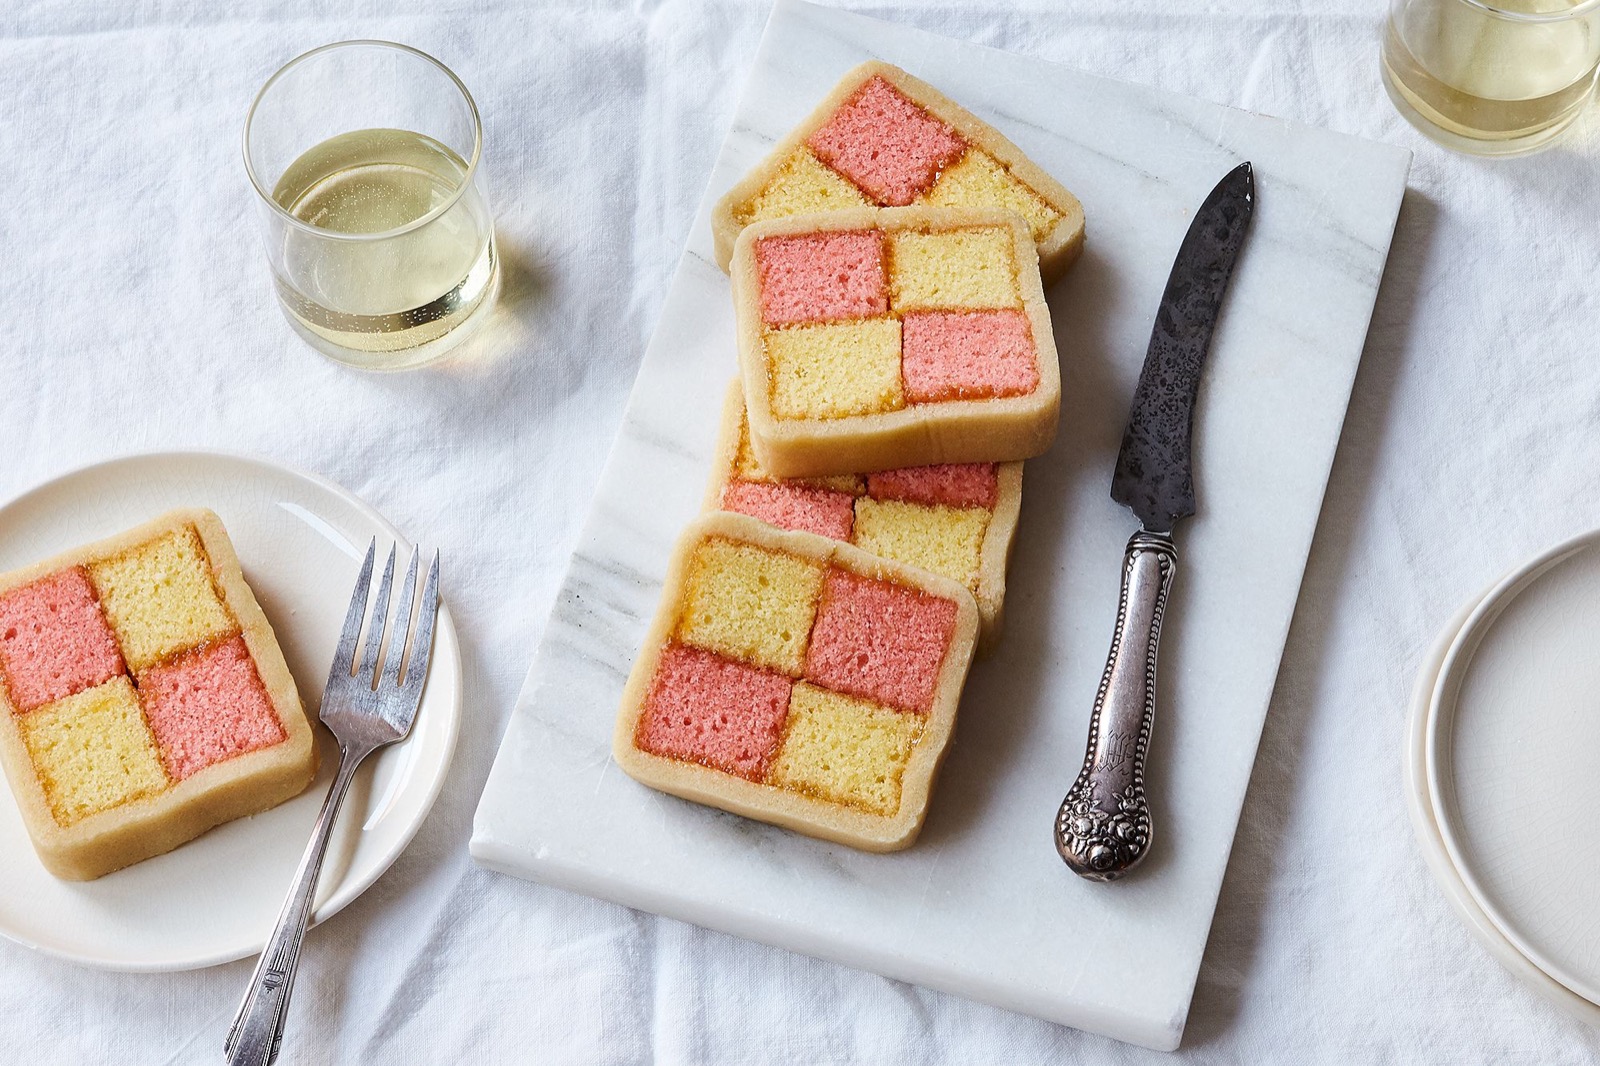 Did You Know I Can Tell How Adventurous You Are Purely by the Assorted International Foods You Choose? Battenberg cake